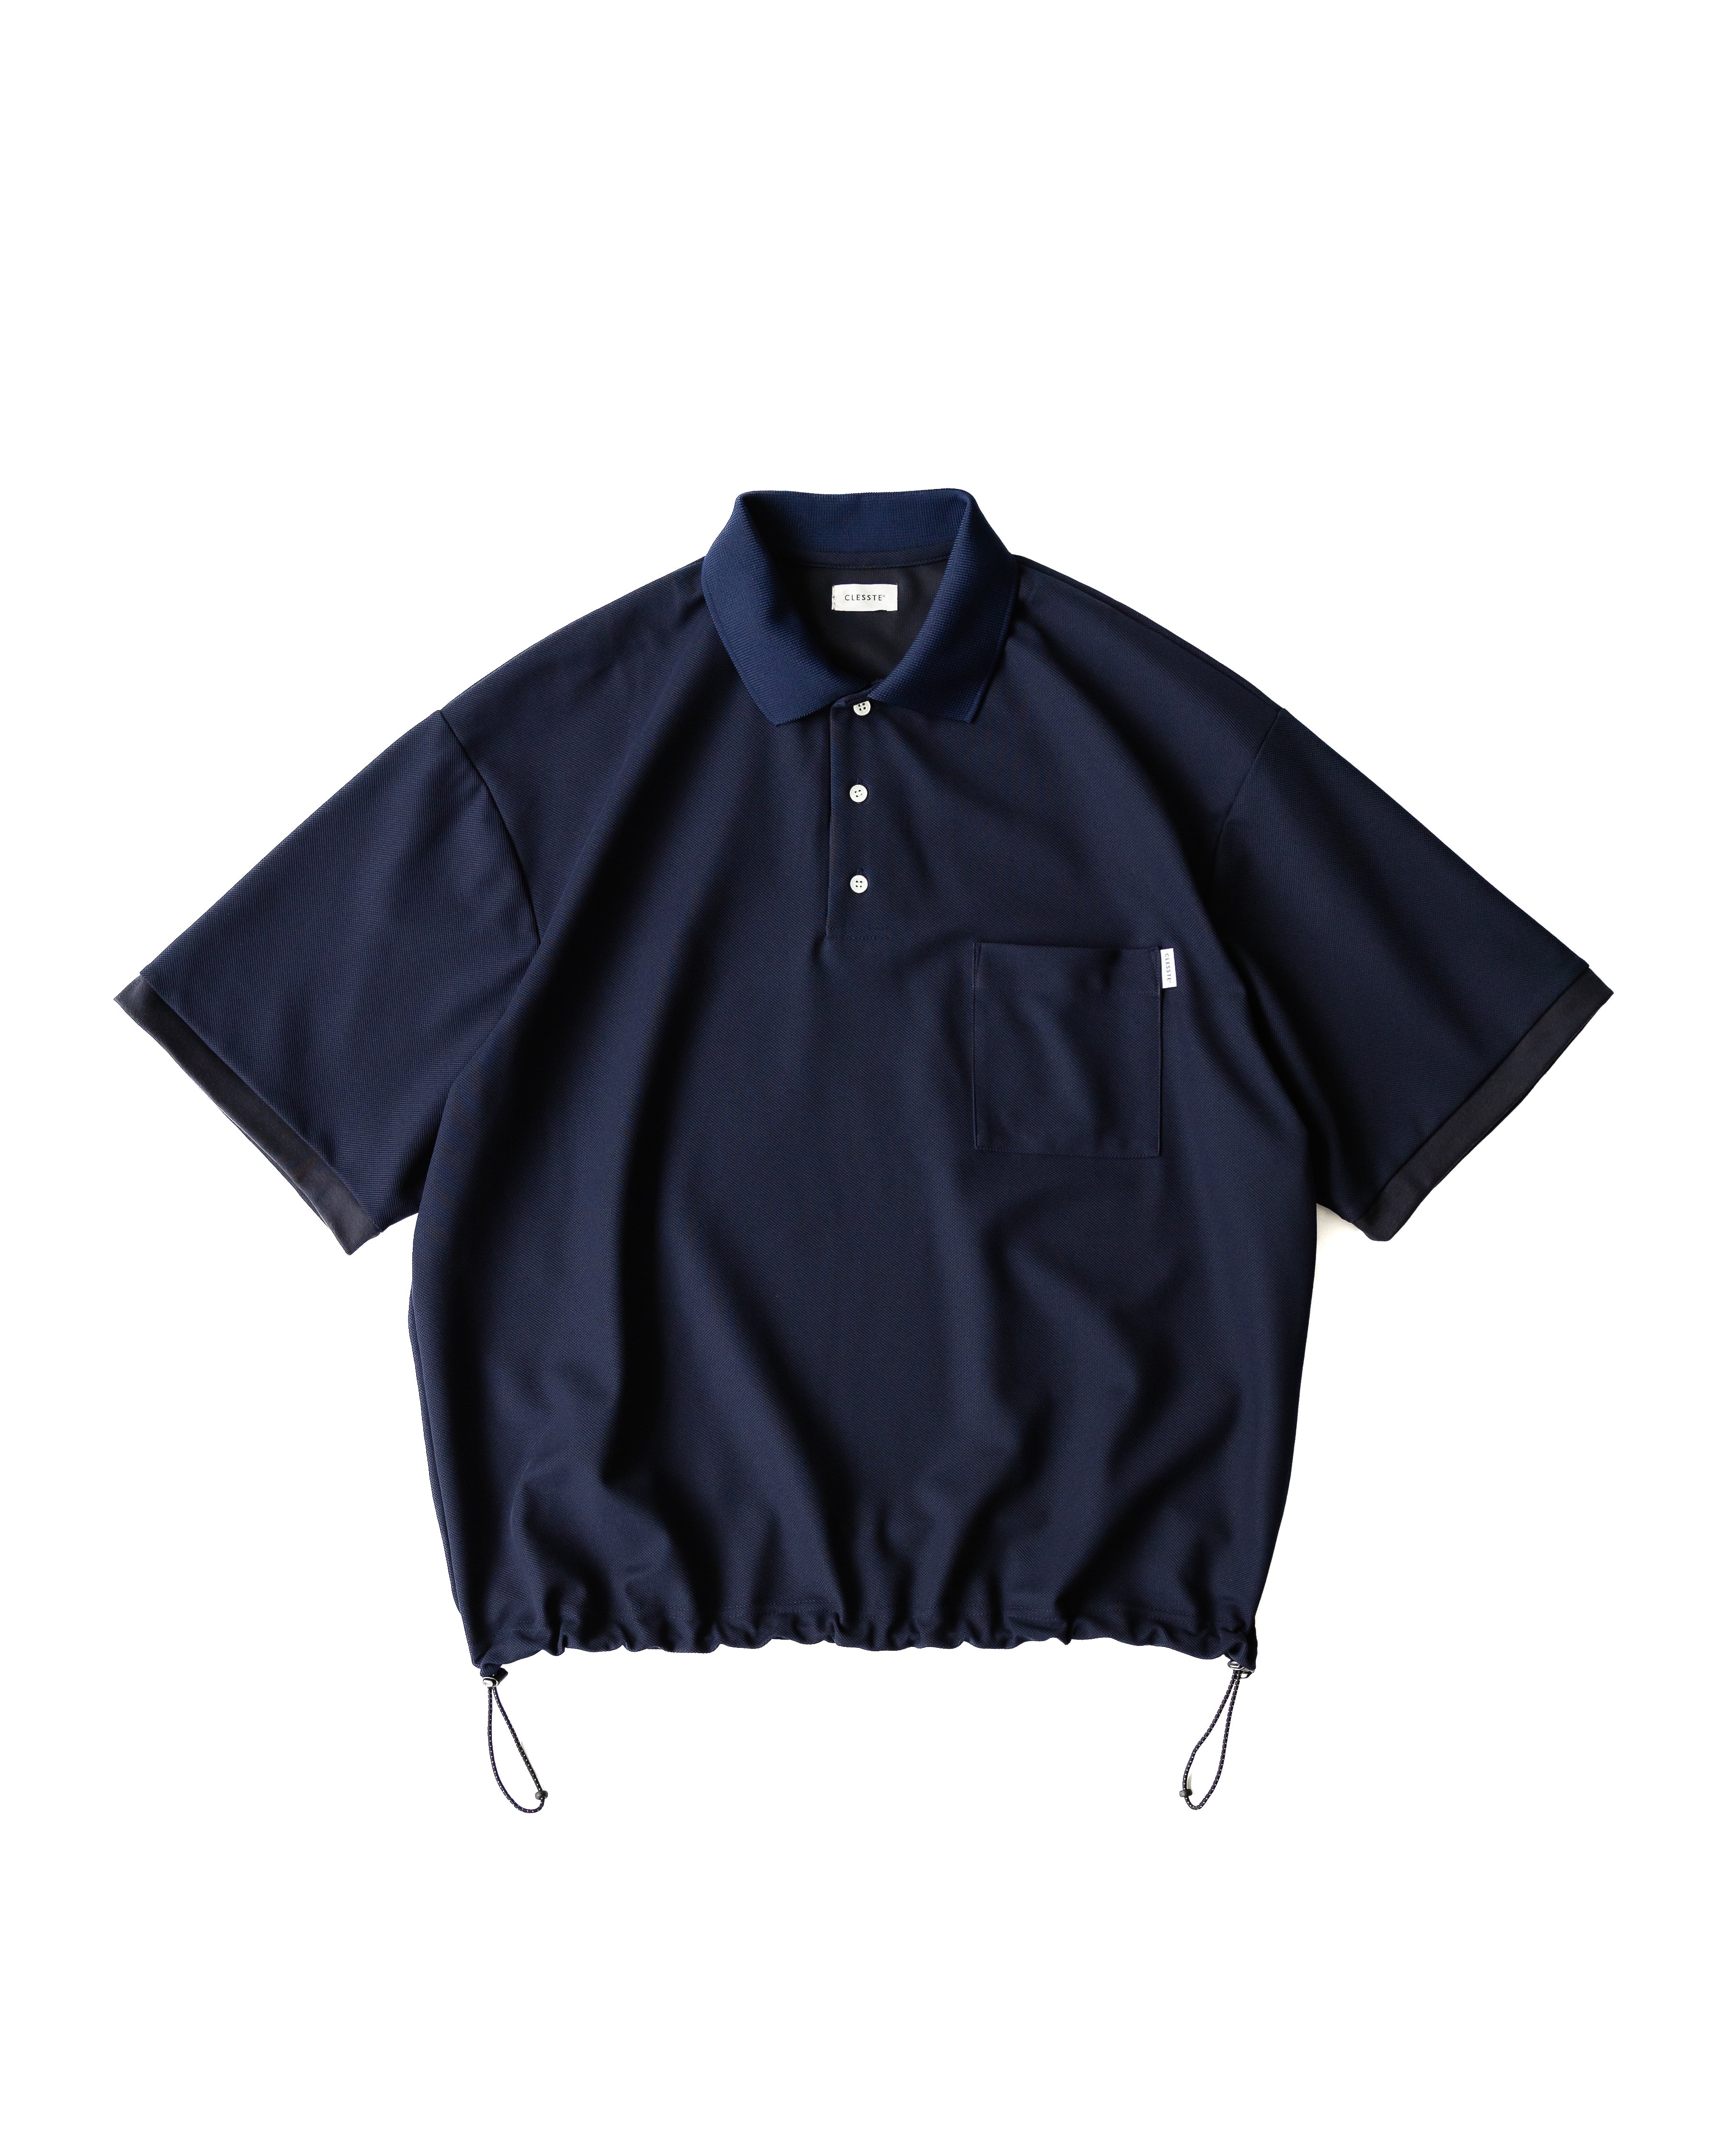 【5.18 SAT 20:00- IN STOCK】ACTIVE CITY S/S POLO SHIRT